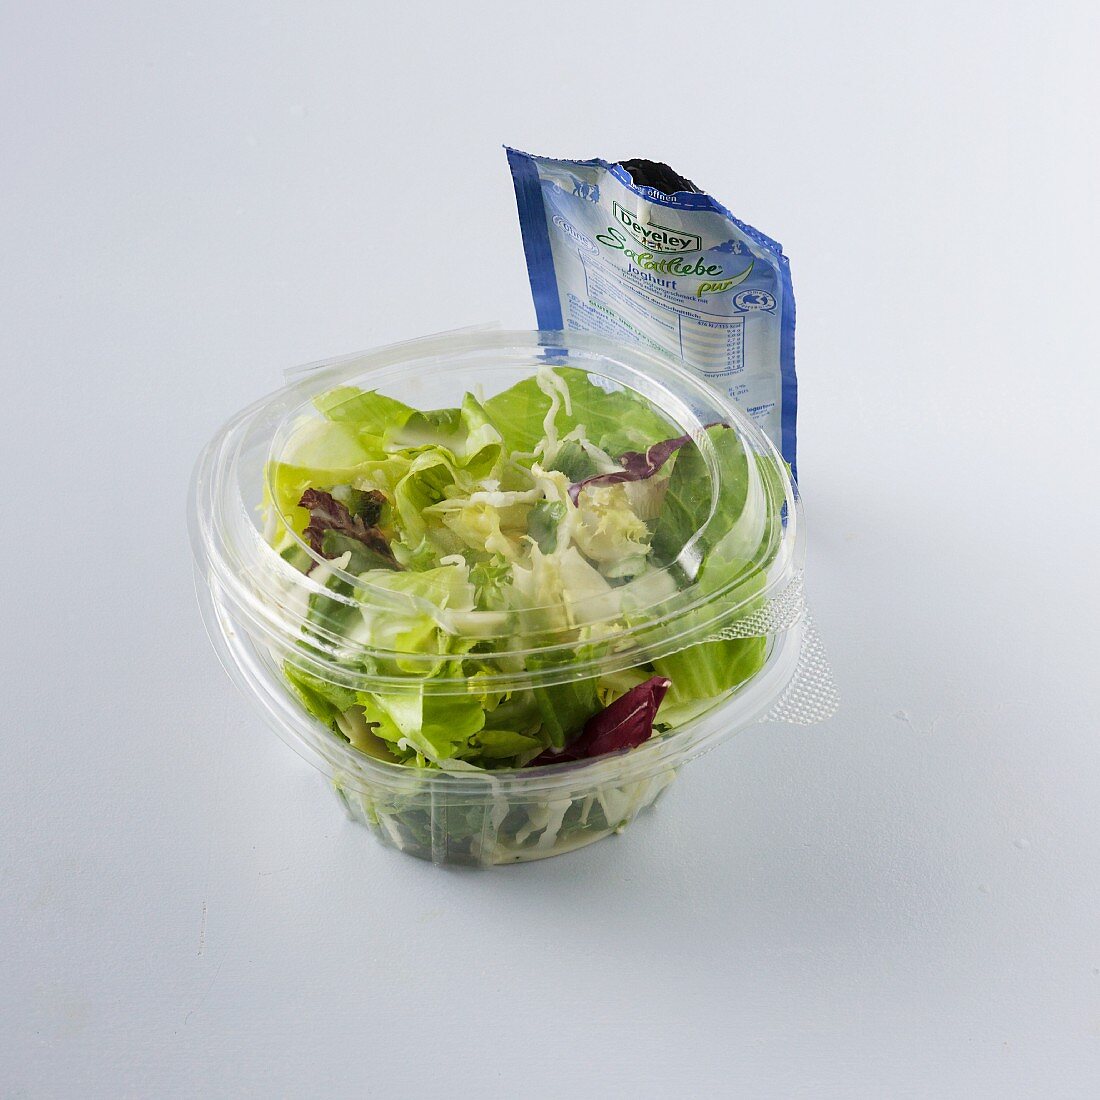 A salad with a dressing